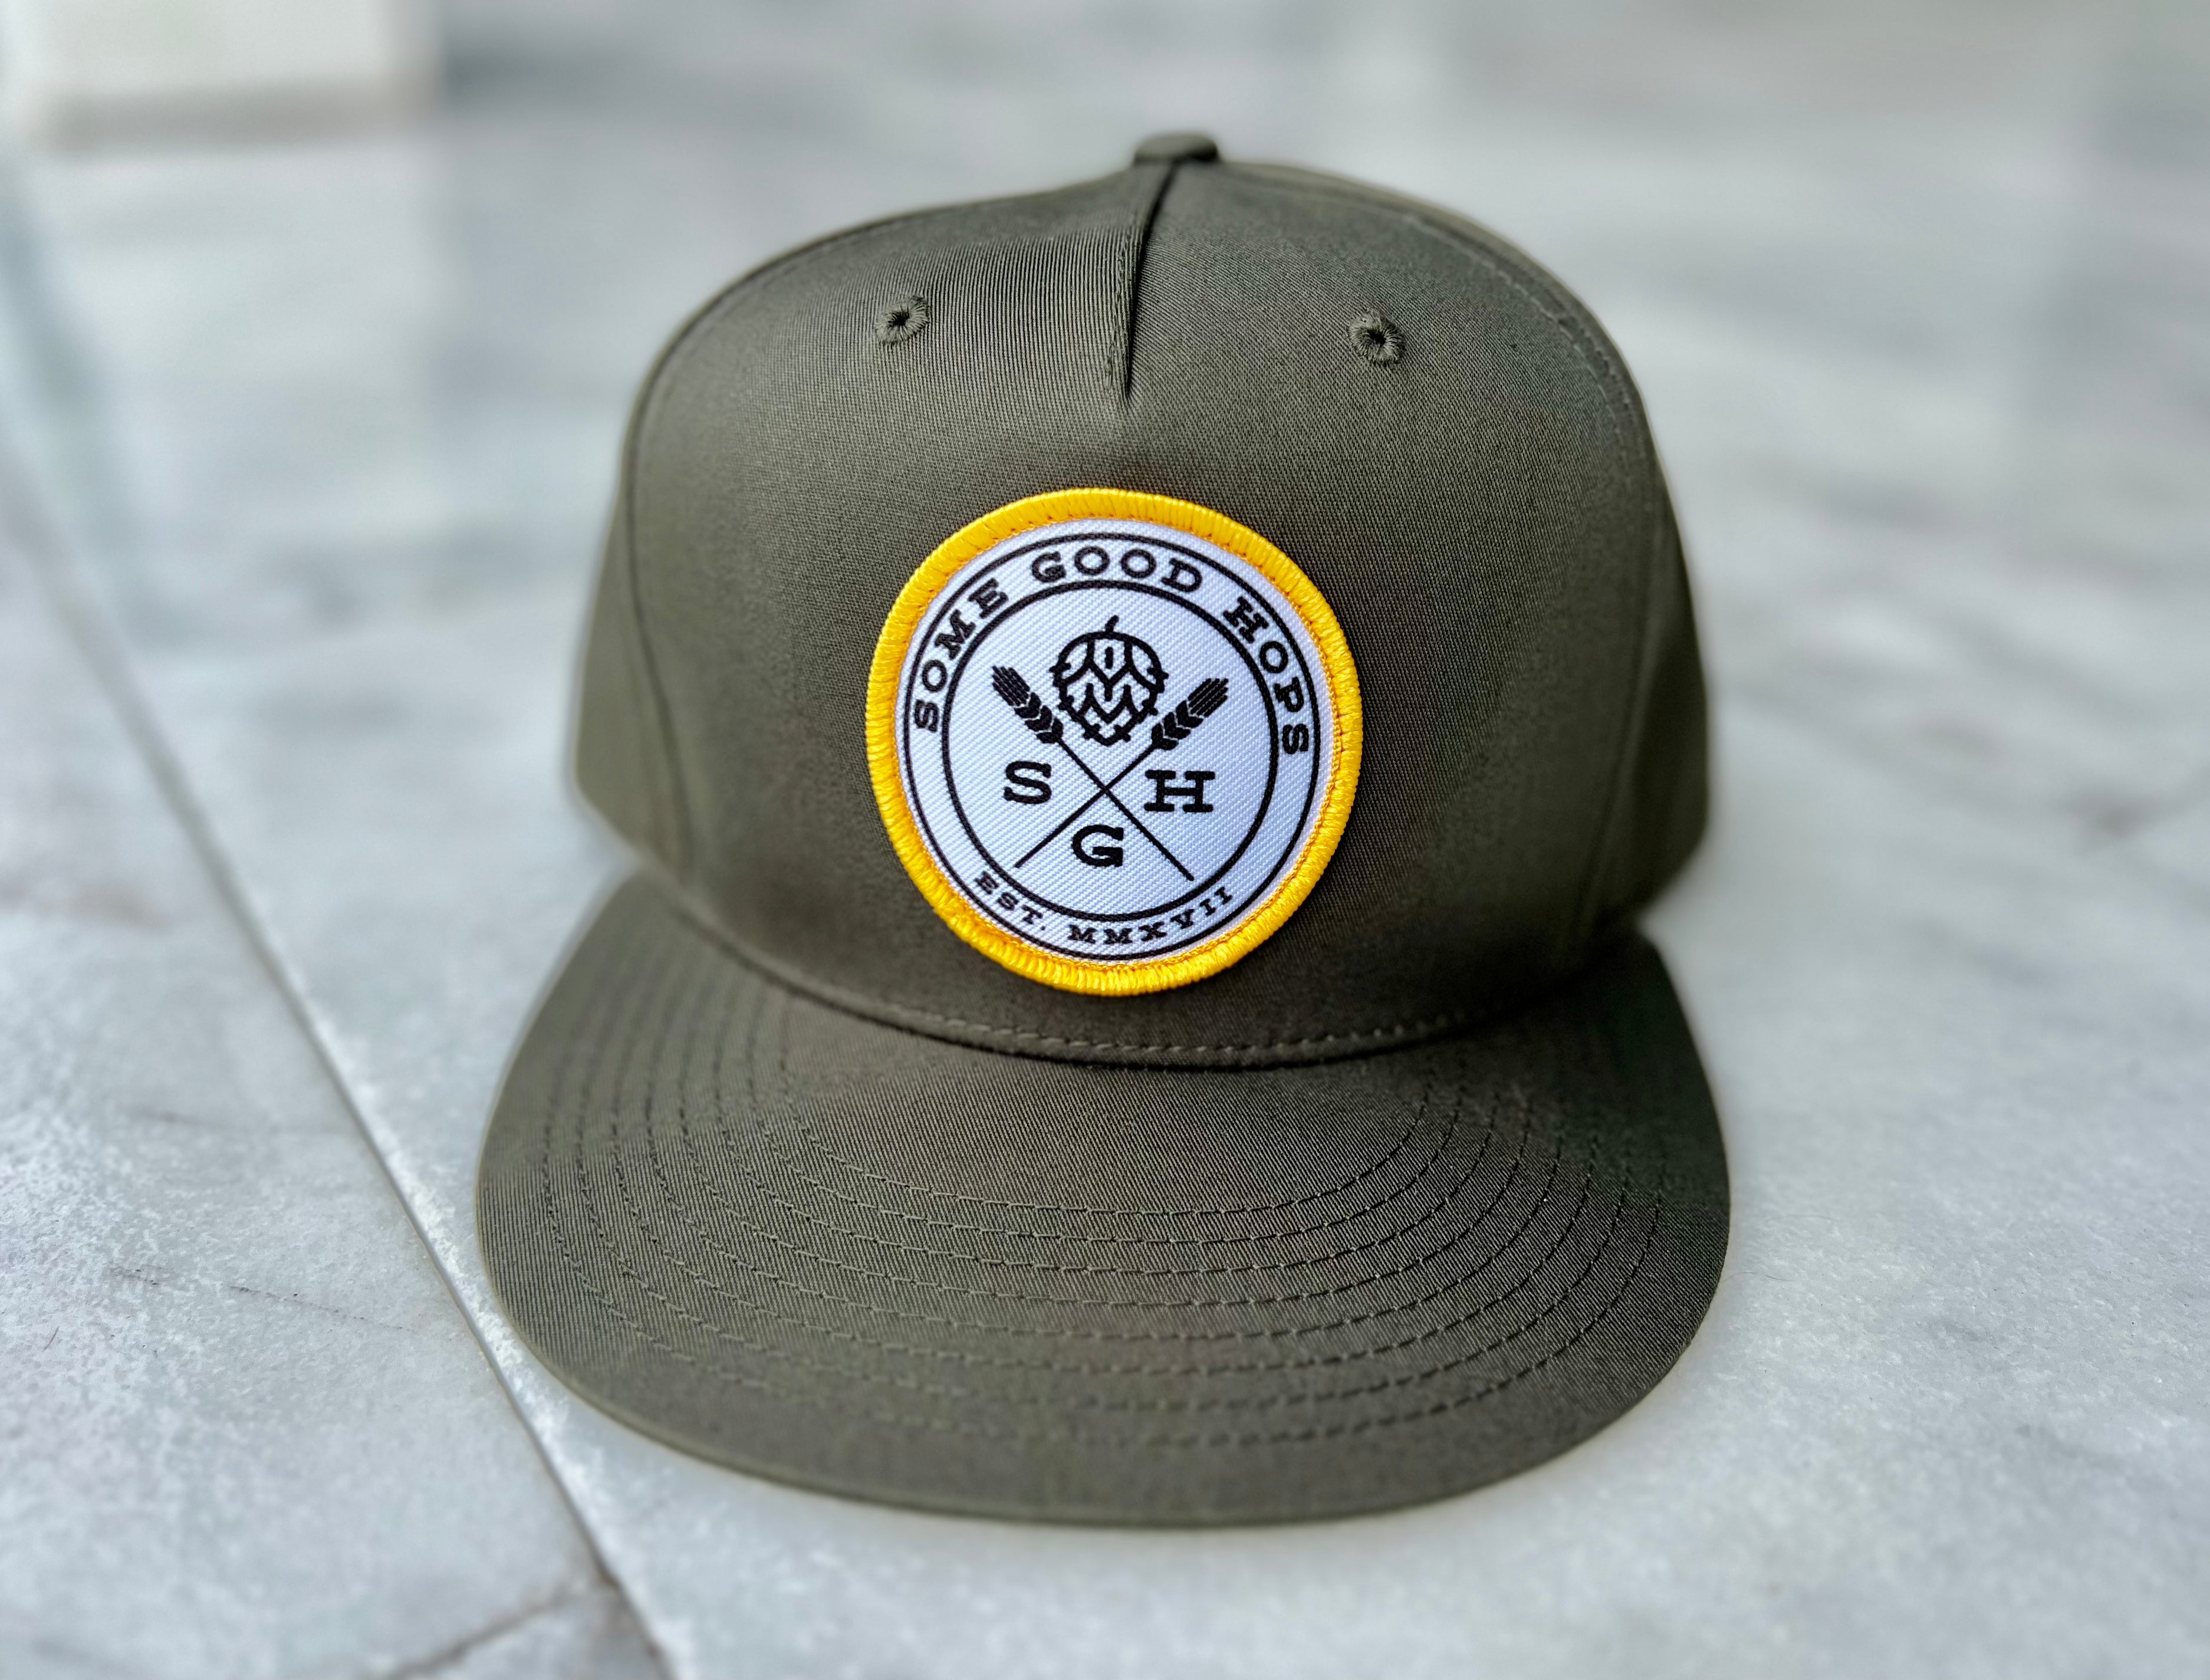 Some Good Hops Olive Green SnapBack Hat with Yellow Stitching and Black Logo (Front View)